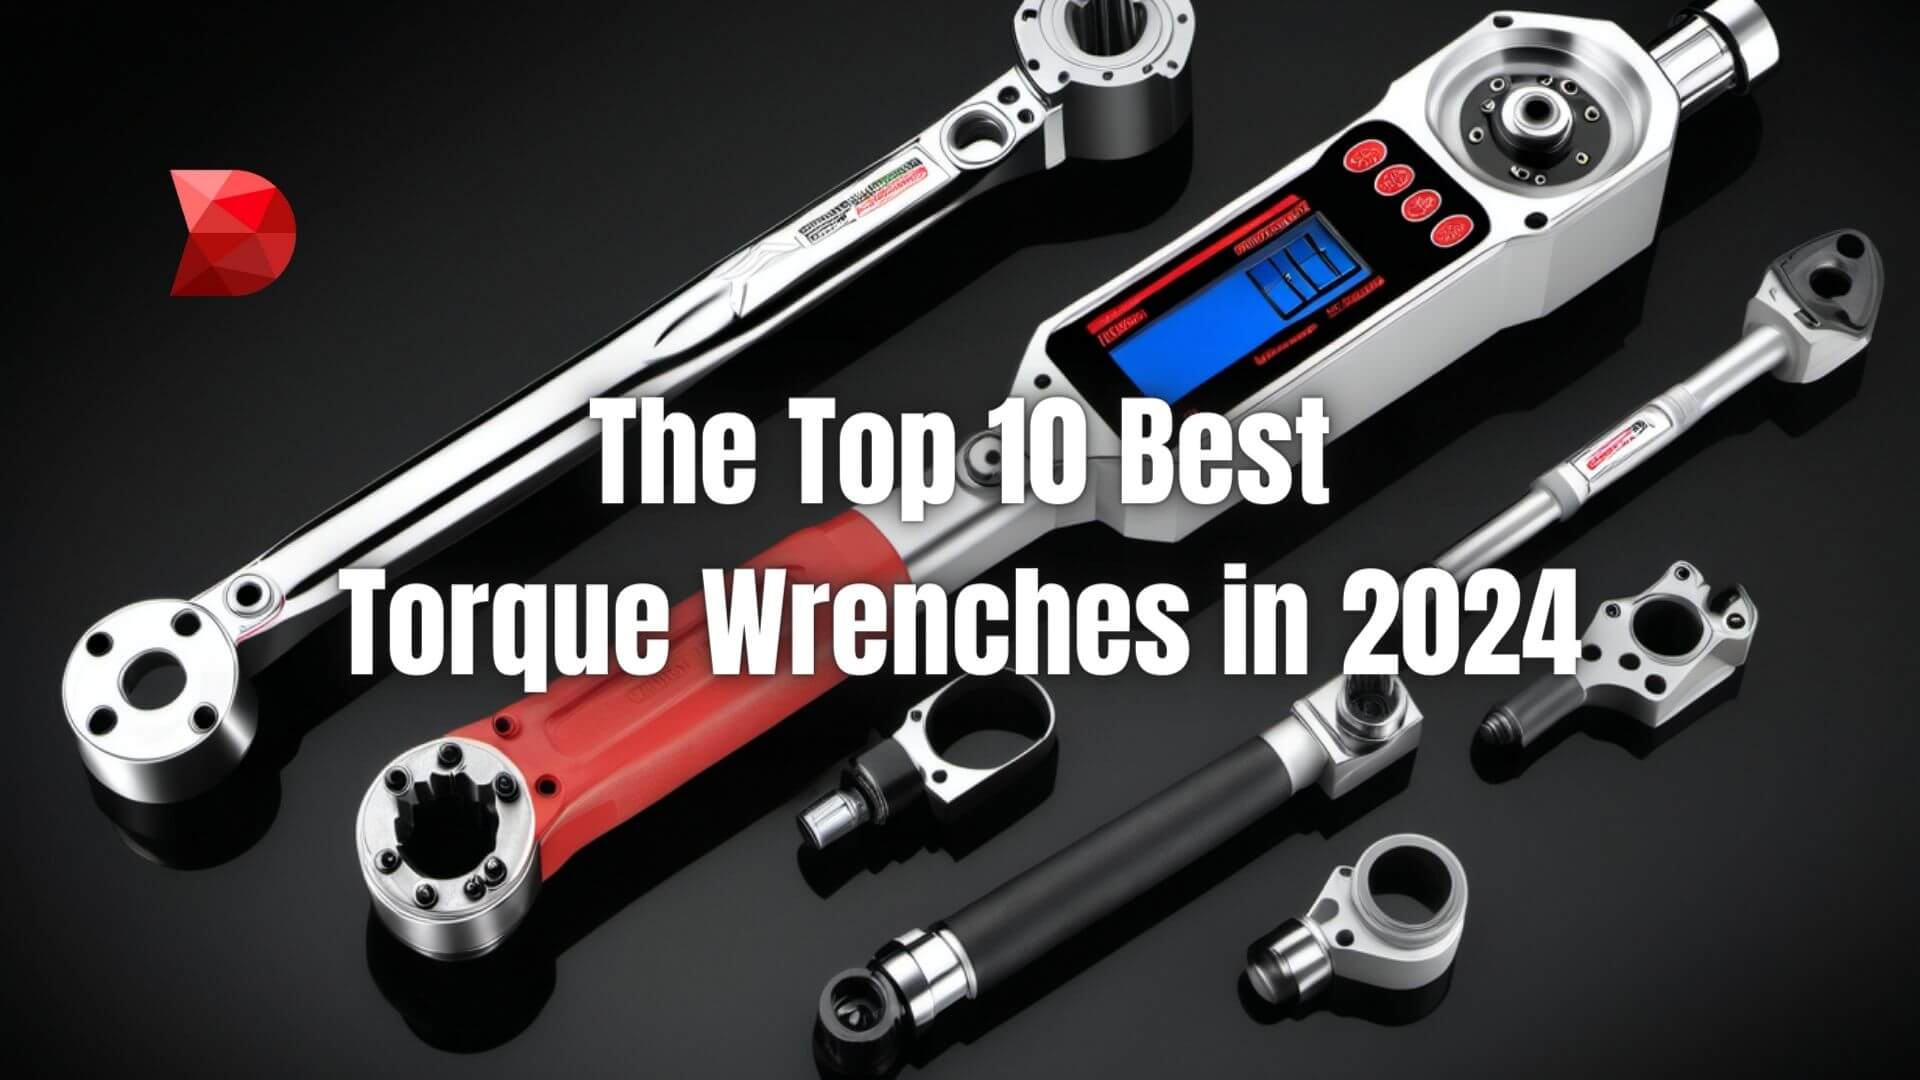 Master tightening tasks effortlessly! Click here to explore this guide to the Top 10 Torque Wrenches in 2024 for precision and reliability.